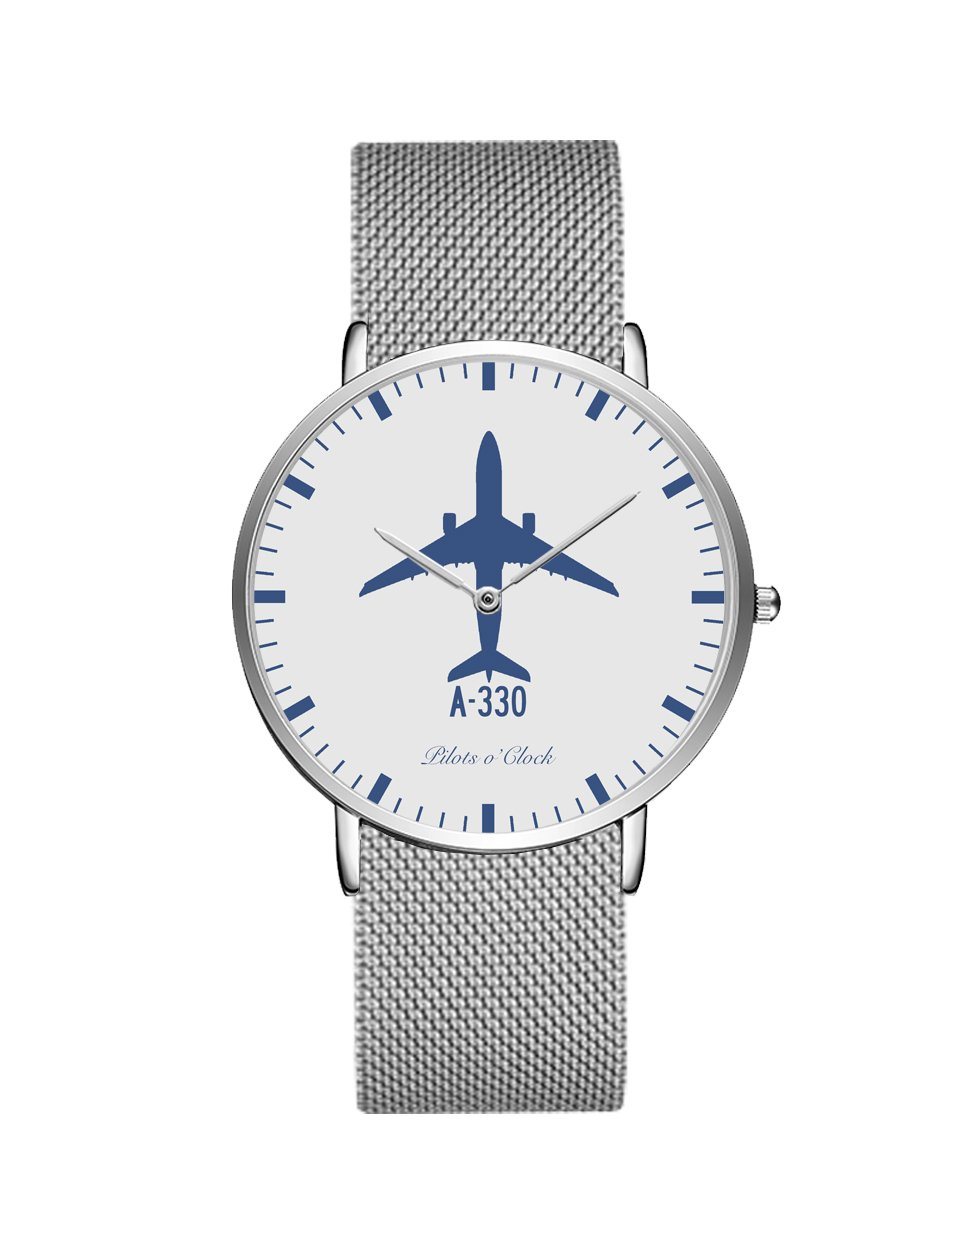 Airbus A330 Stainless Steel Strap Watches Pilot Eyes Store Silver & Silver Stainless Steel Strap 